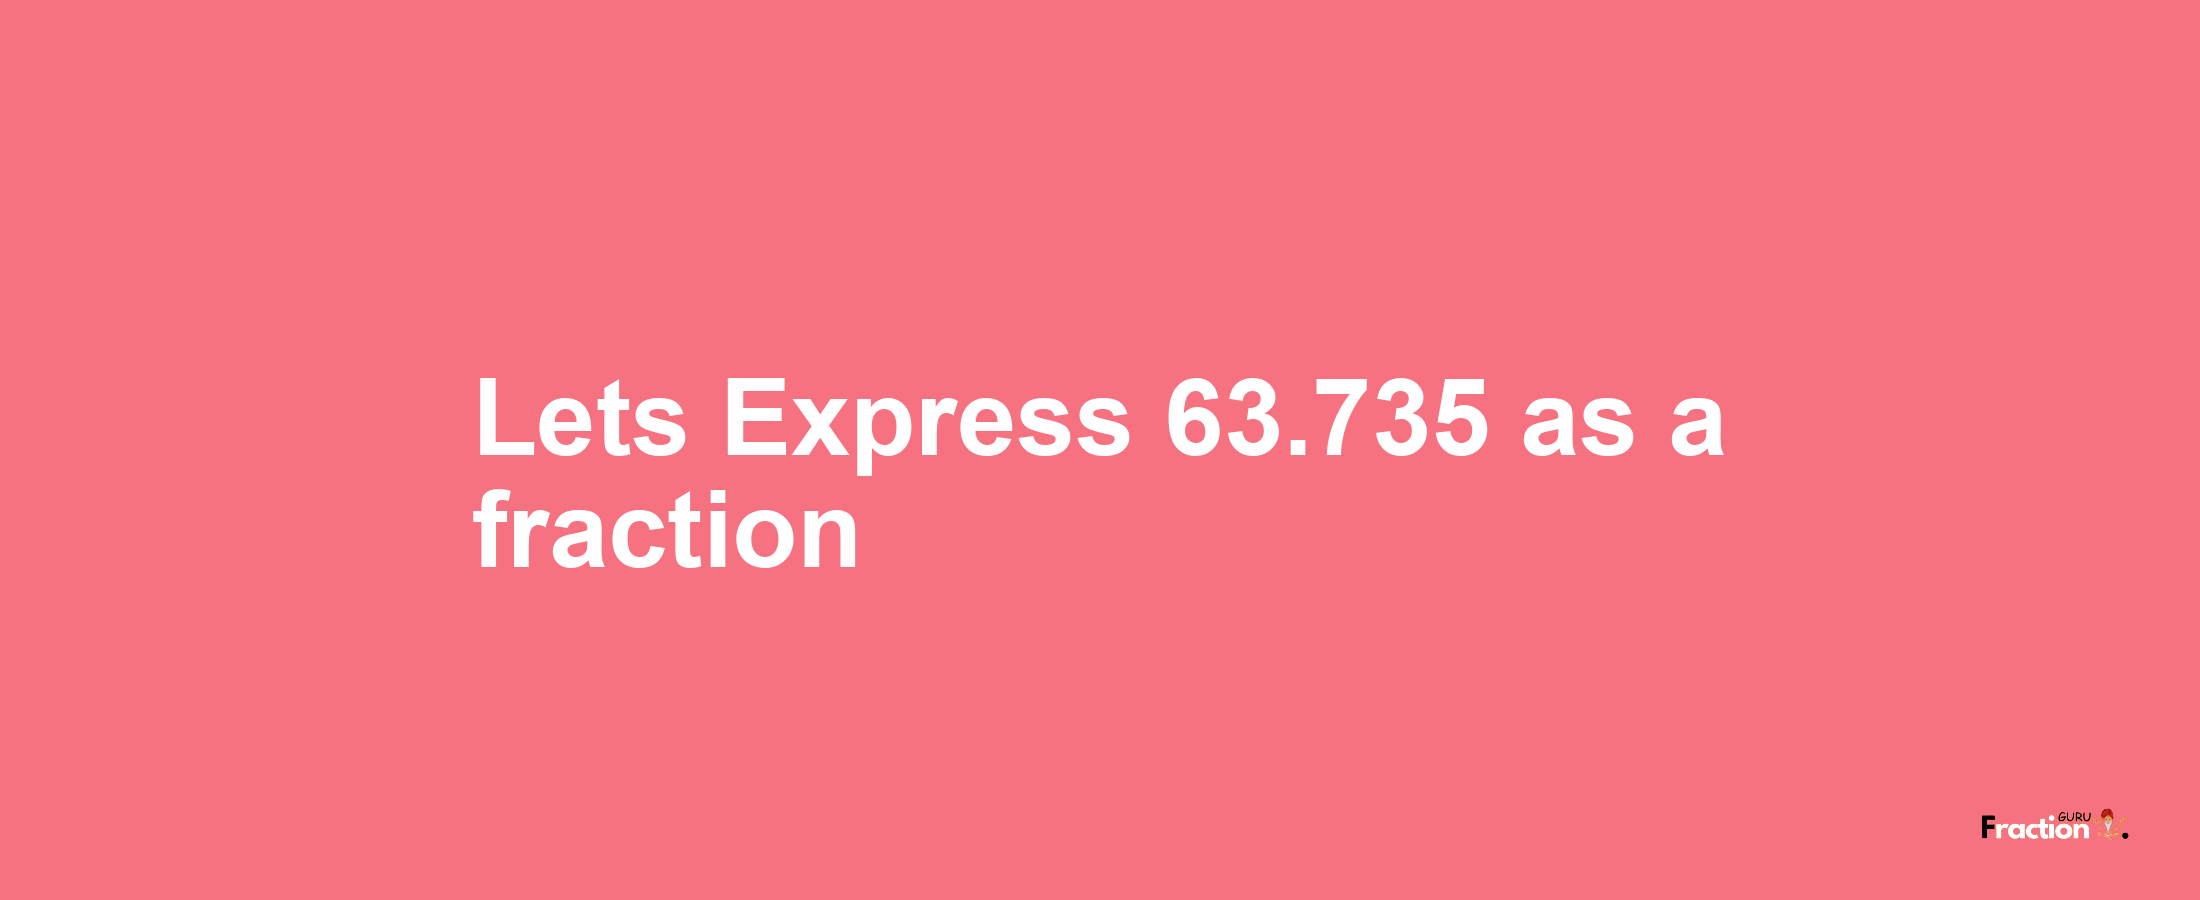 Lets Express 63.735 as afraction